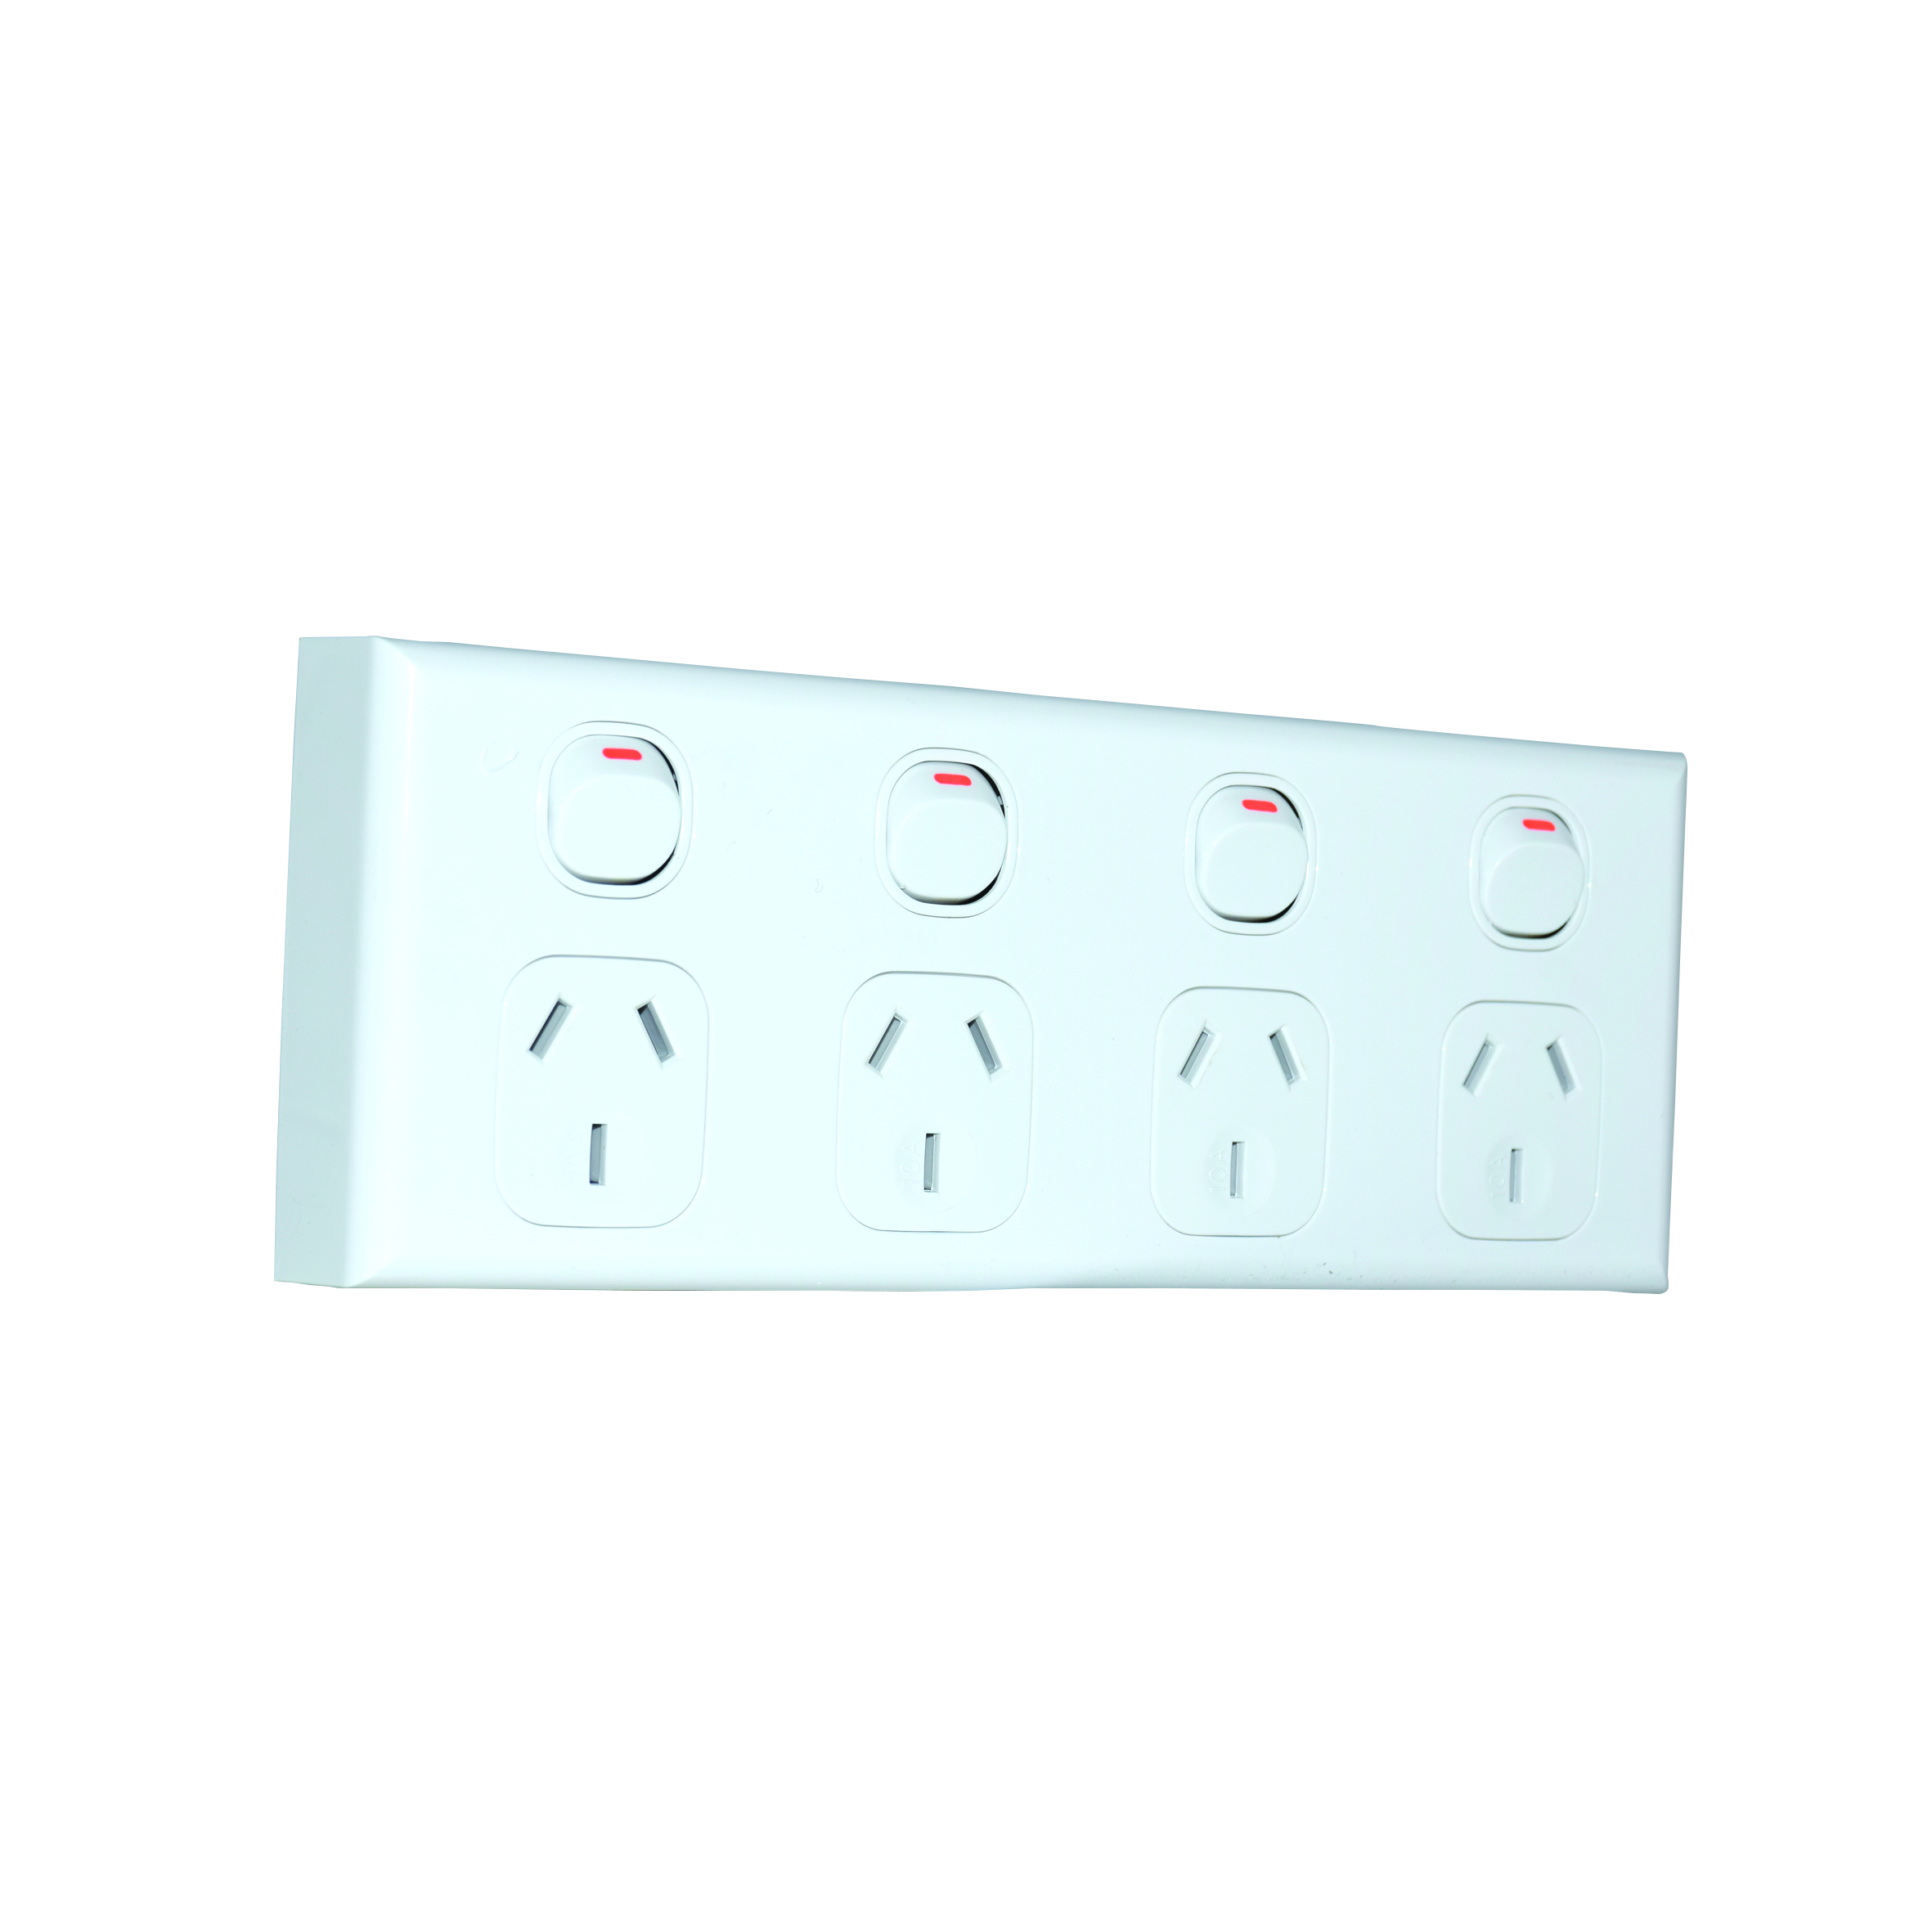 10A Quad Switched, Horizontal Power Point, White, Home